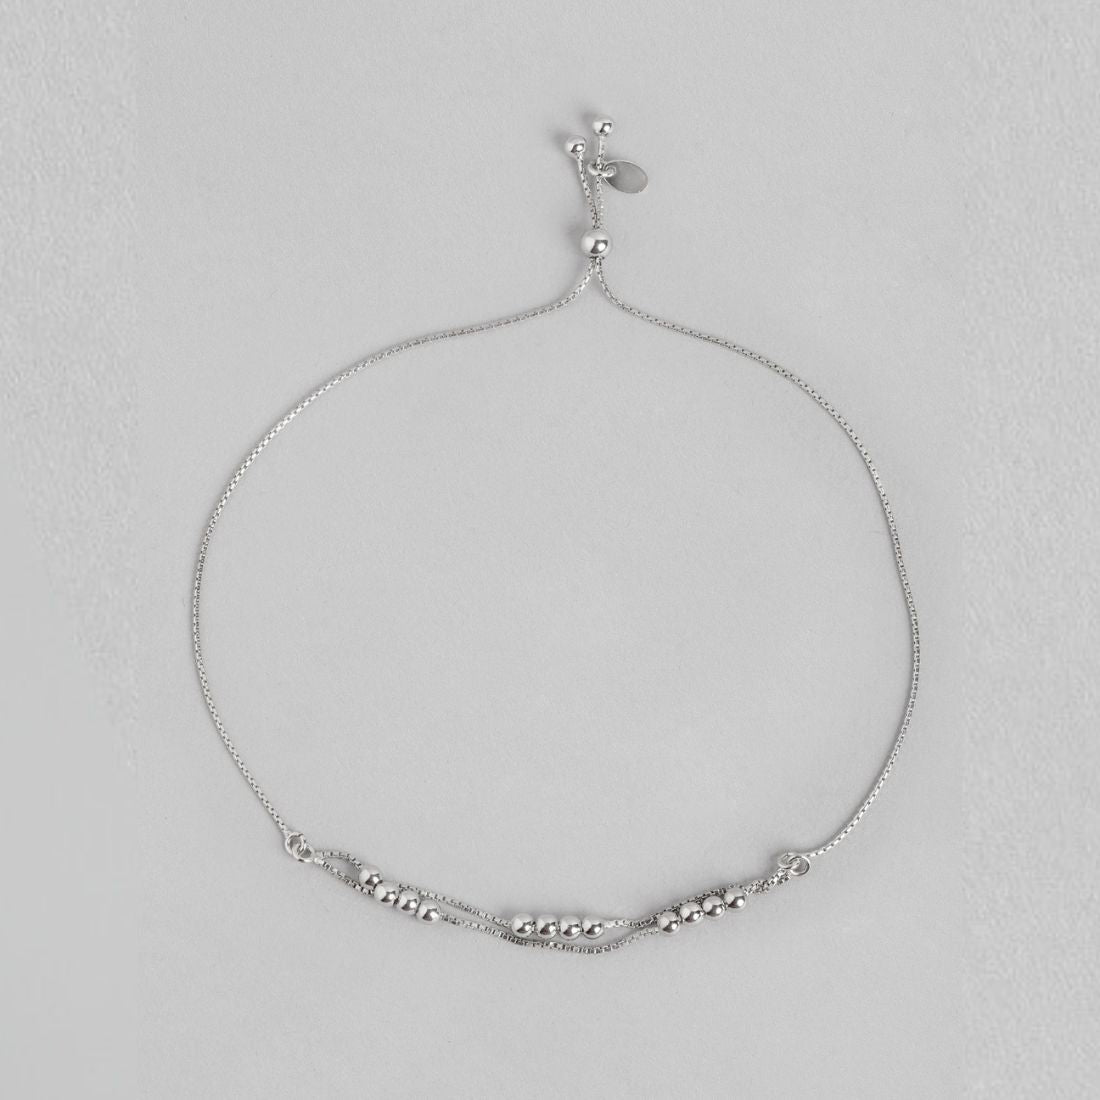 Ballroom Radiance Rhodium-Plated 925 Sterling Silver Anklet with Box Chain